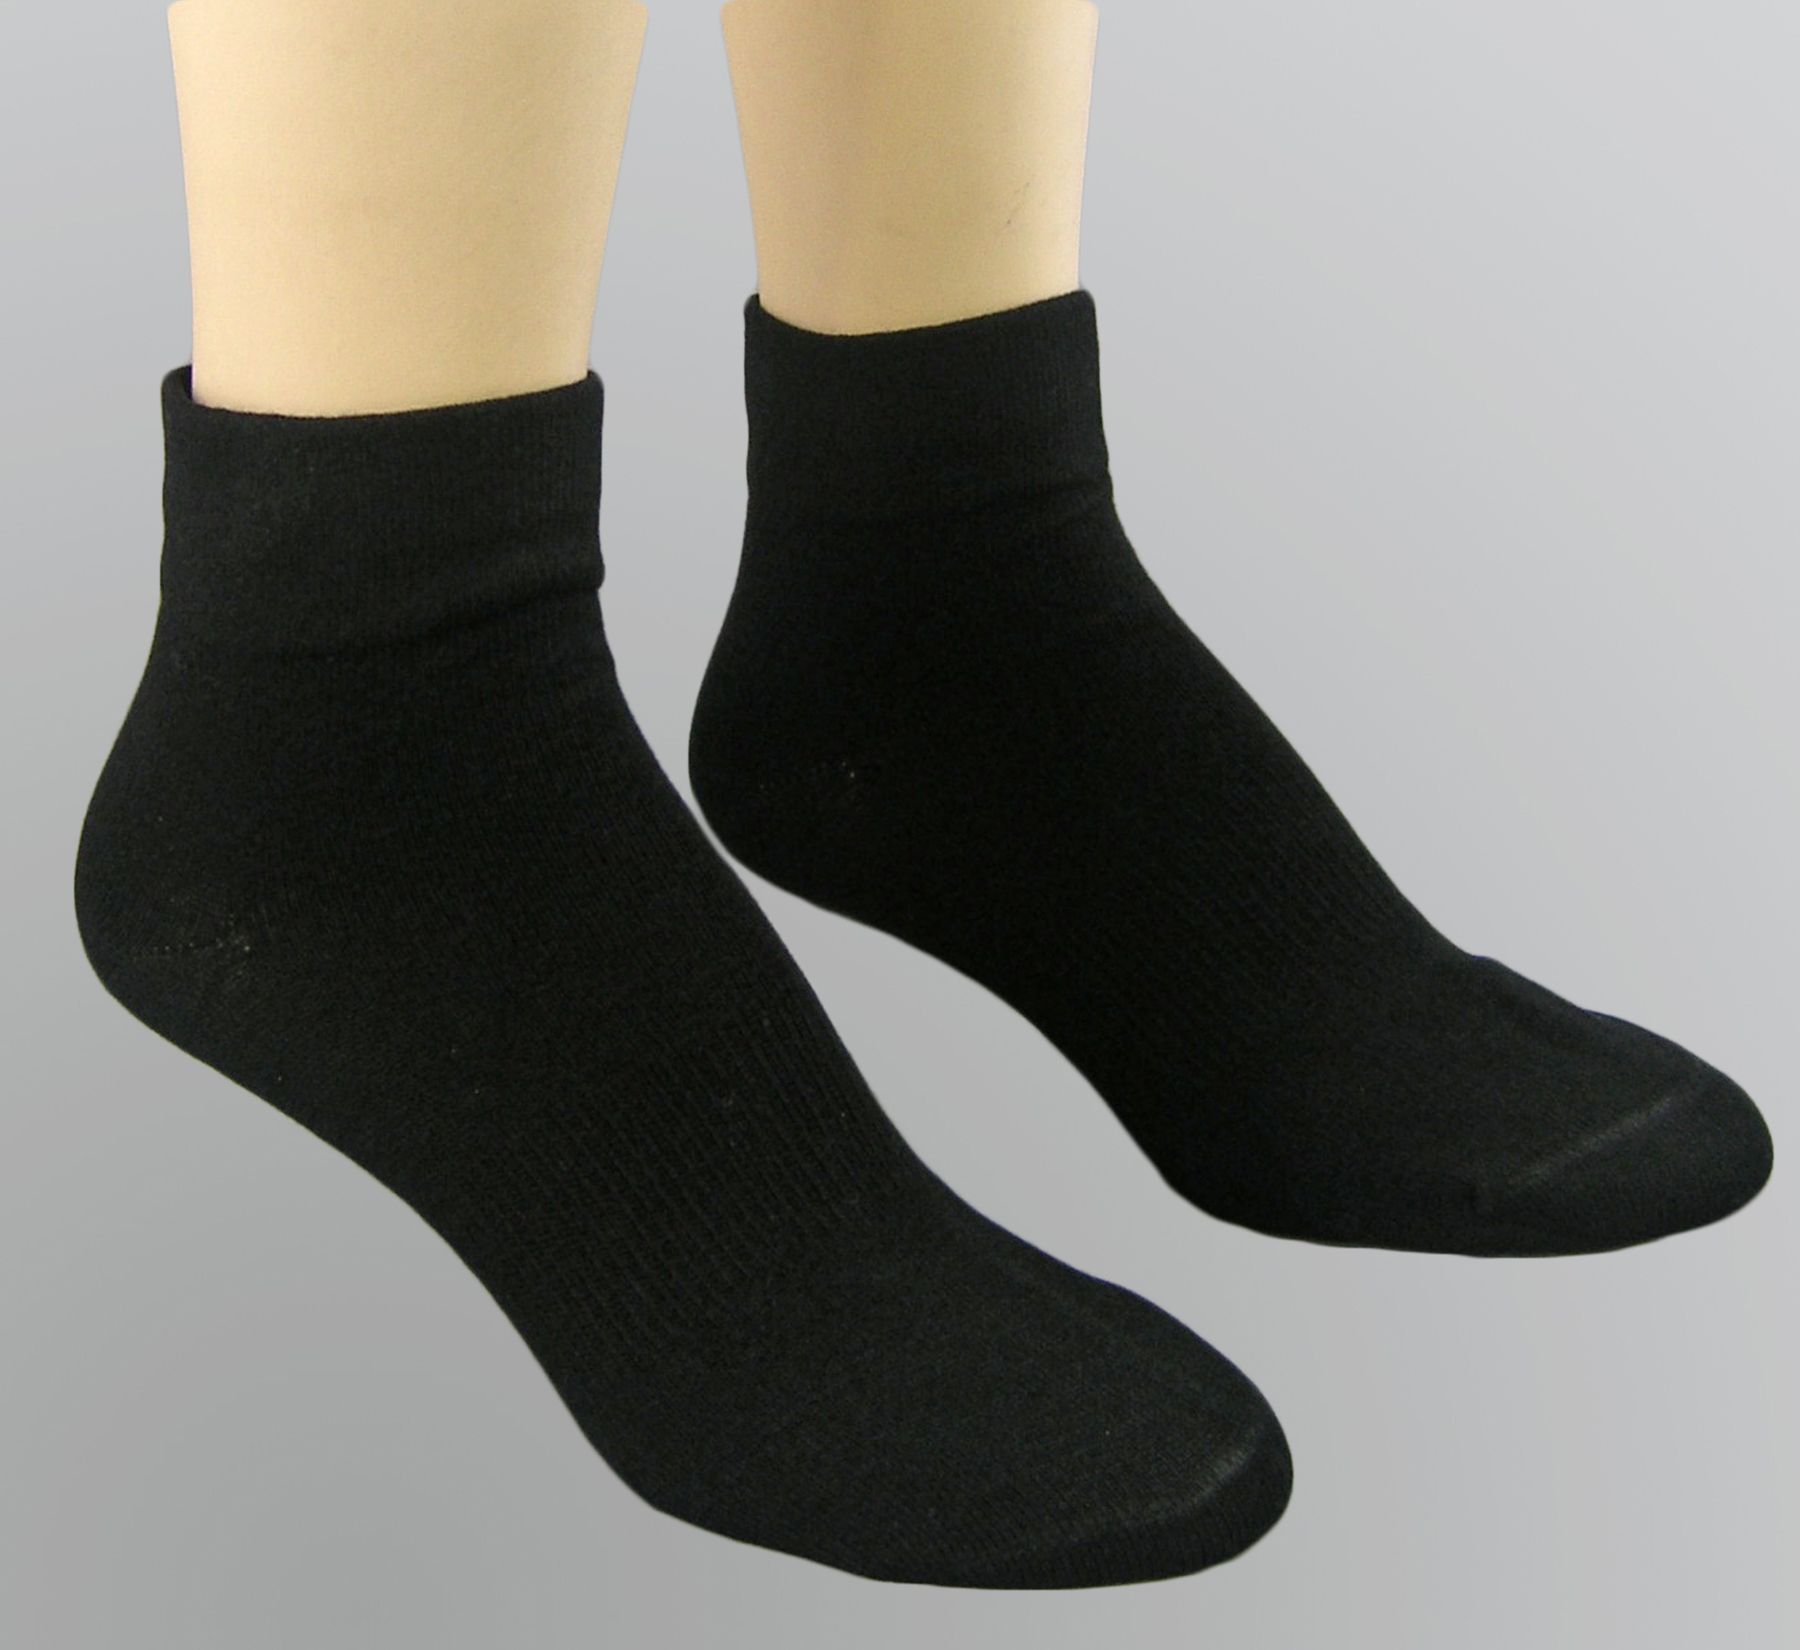 Hanes Women's Ankle with Arch Support Socks - Clothing, Shoes & Jewelry ...